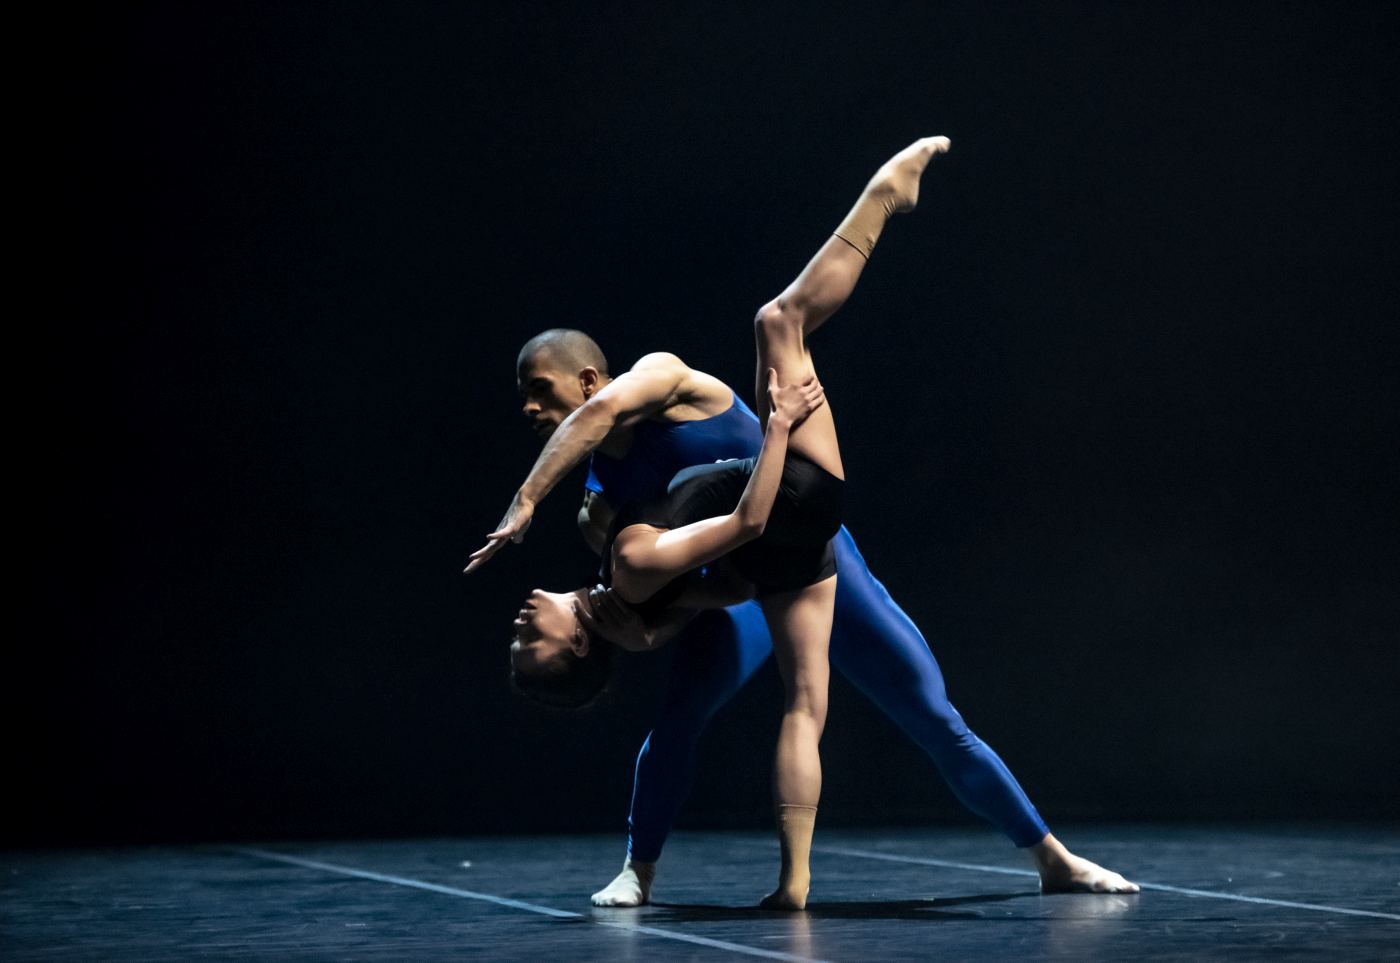 9. A.Tavares and L.Axel, “Nighttime Showtime” by J.Hernandez, Ballet of the State Theater Nuremberg 2022 © B.Stöß